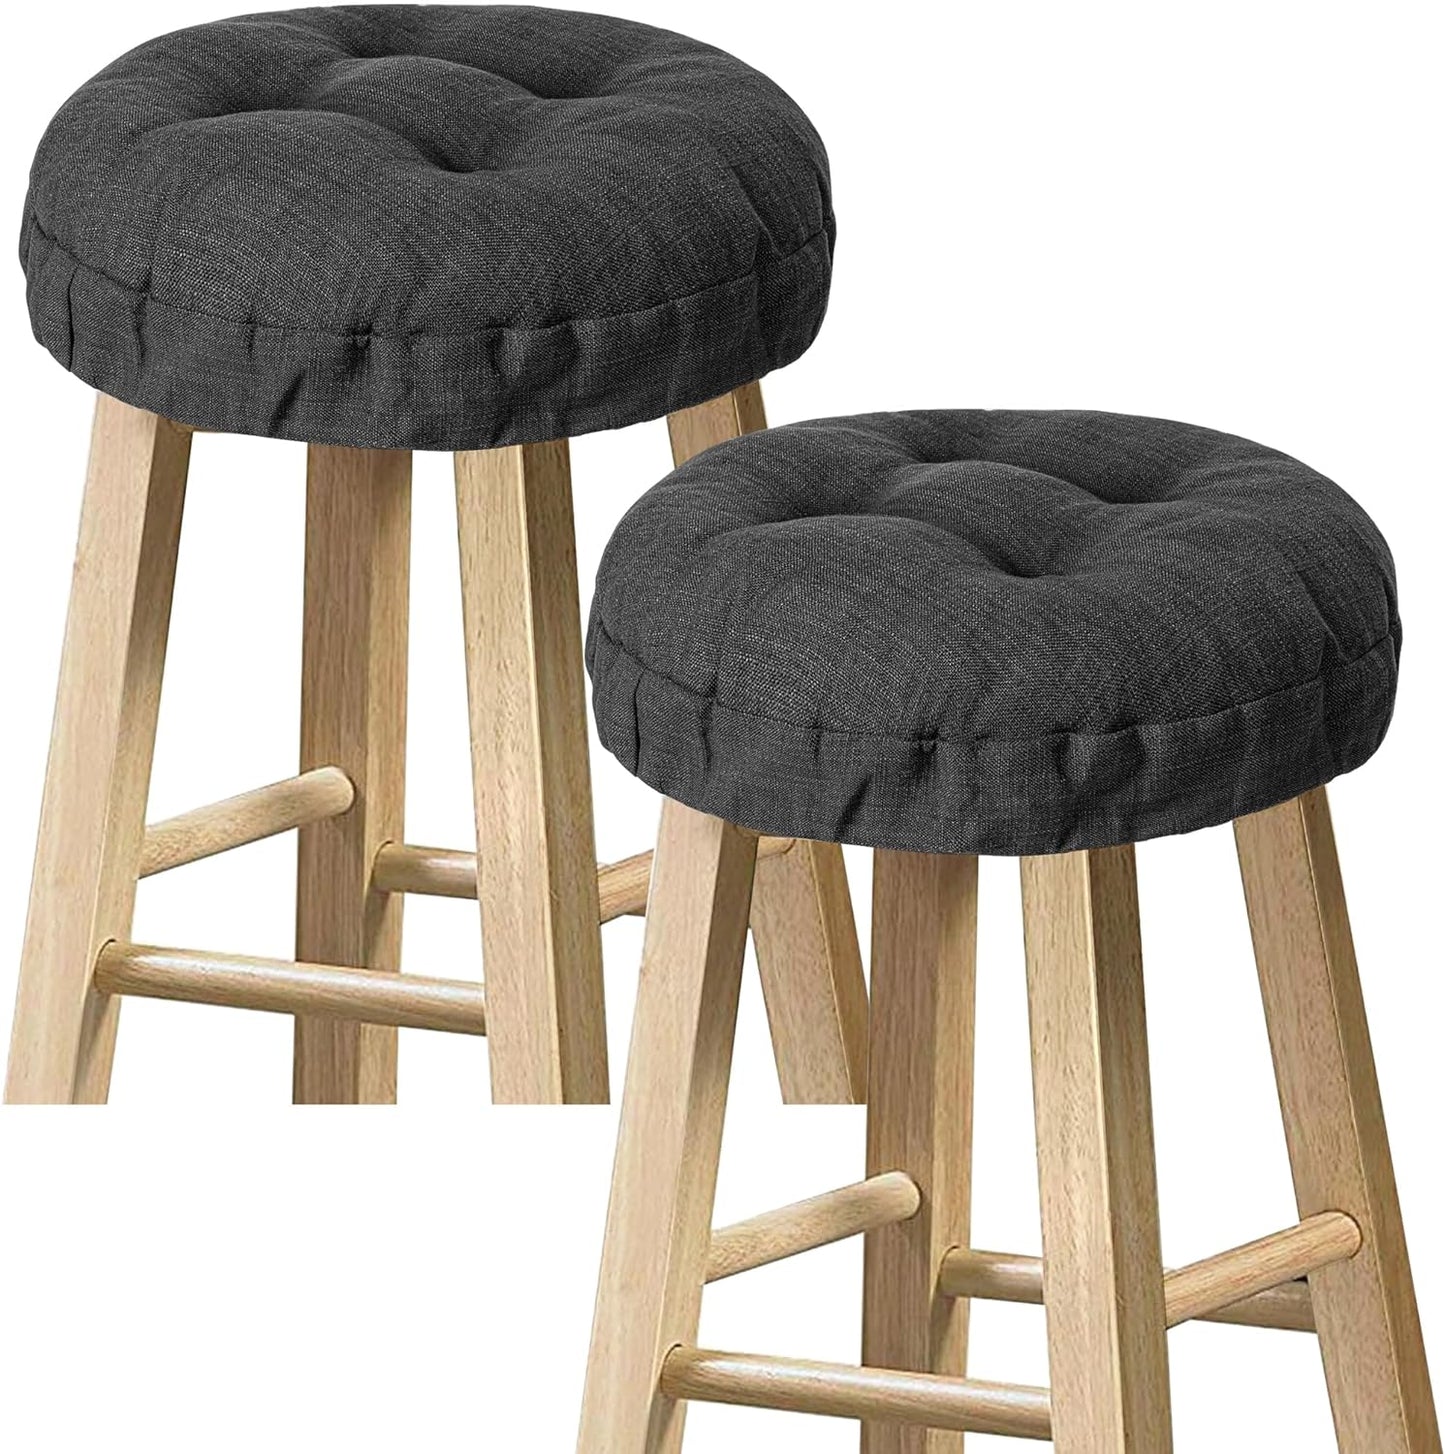 Sunlit Bar Stool Covers - Set of 2 Round Bar Stool Seat Covers, Soft and Cushioned Bar Chair Covers, Easy to Install and Wash, Cover Only, 14 Inch Diameter, Black